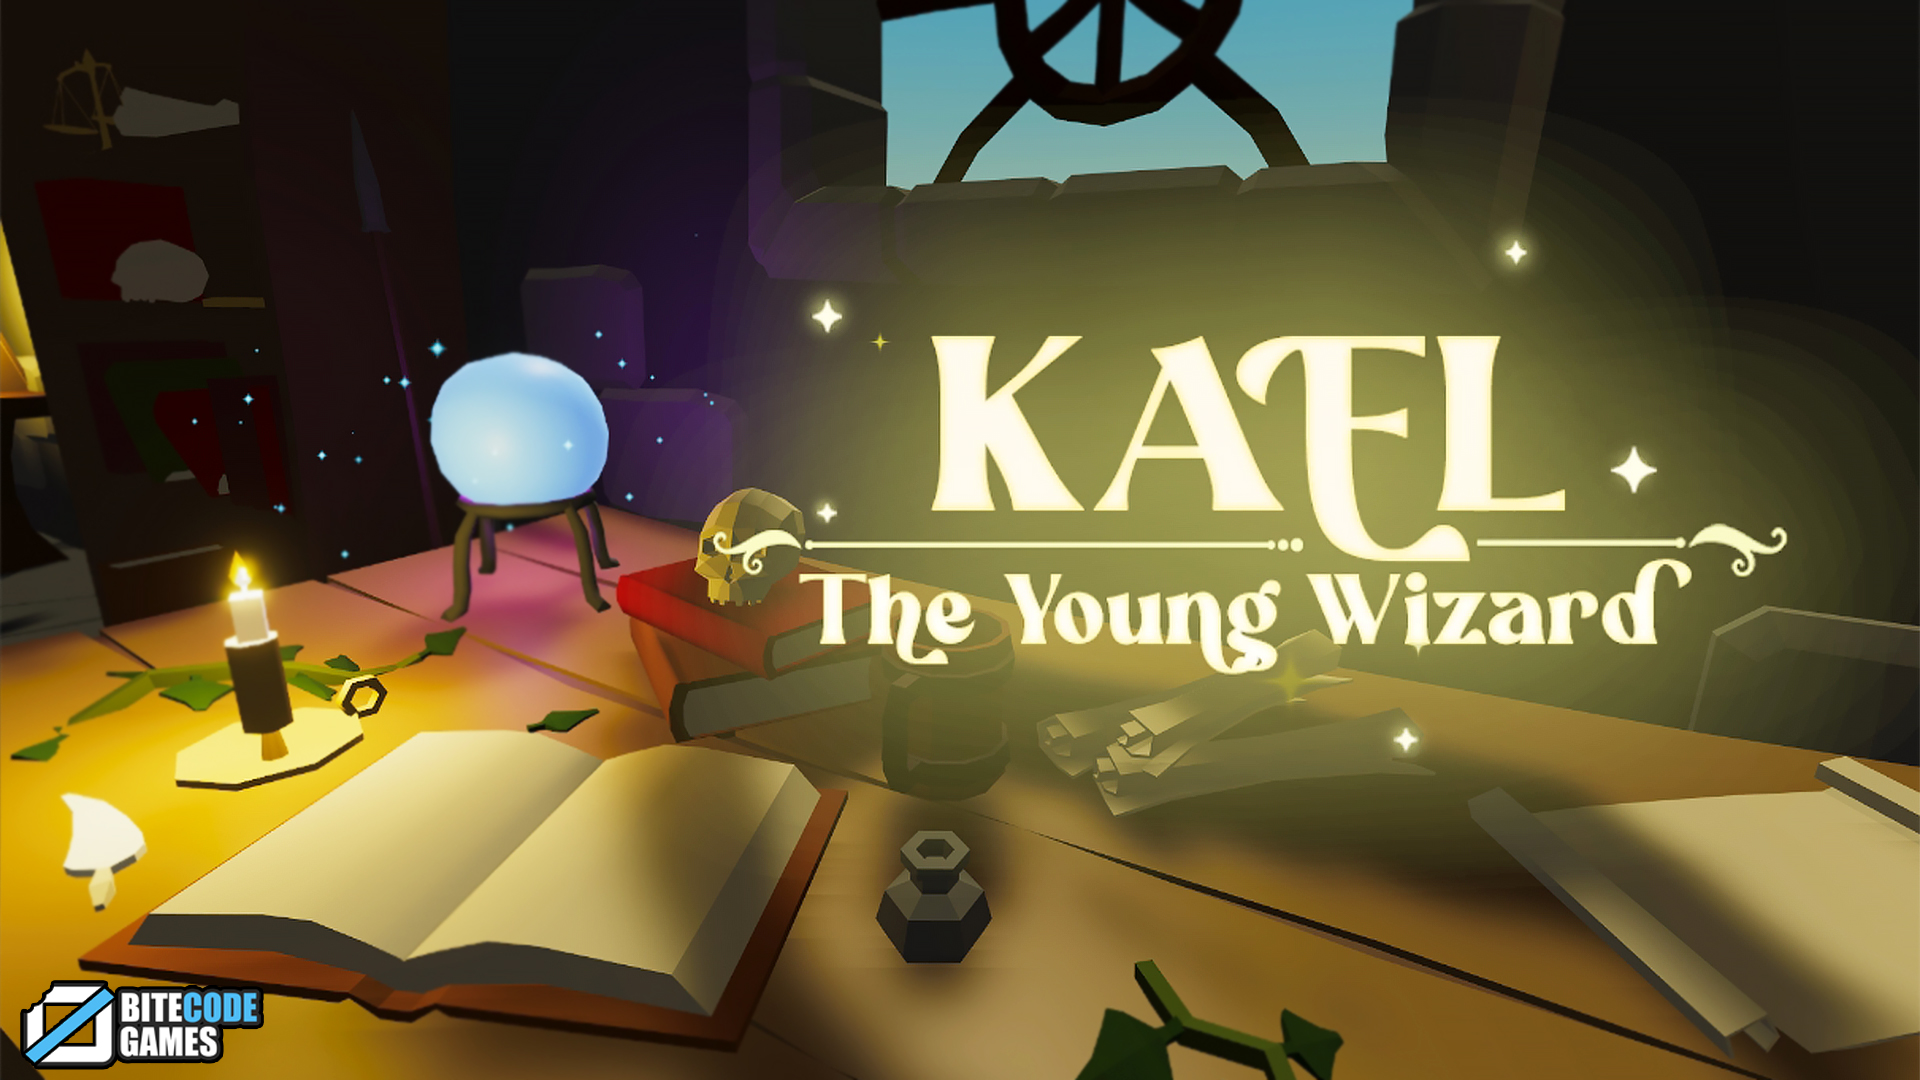 Kael - The Young Wizard